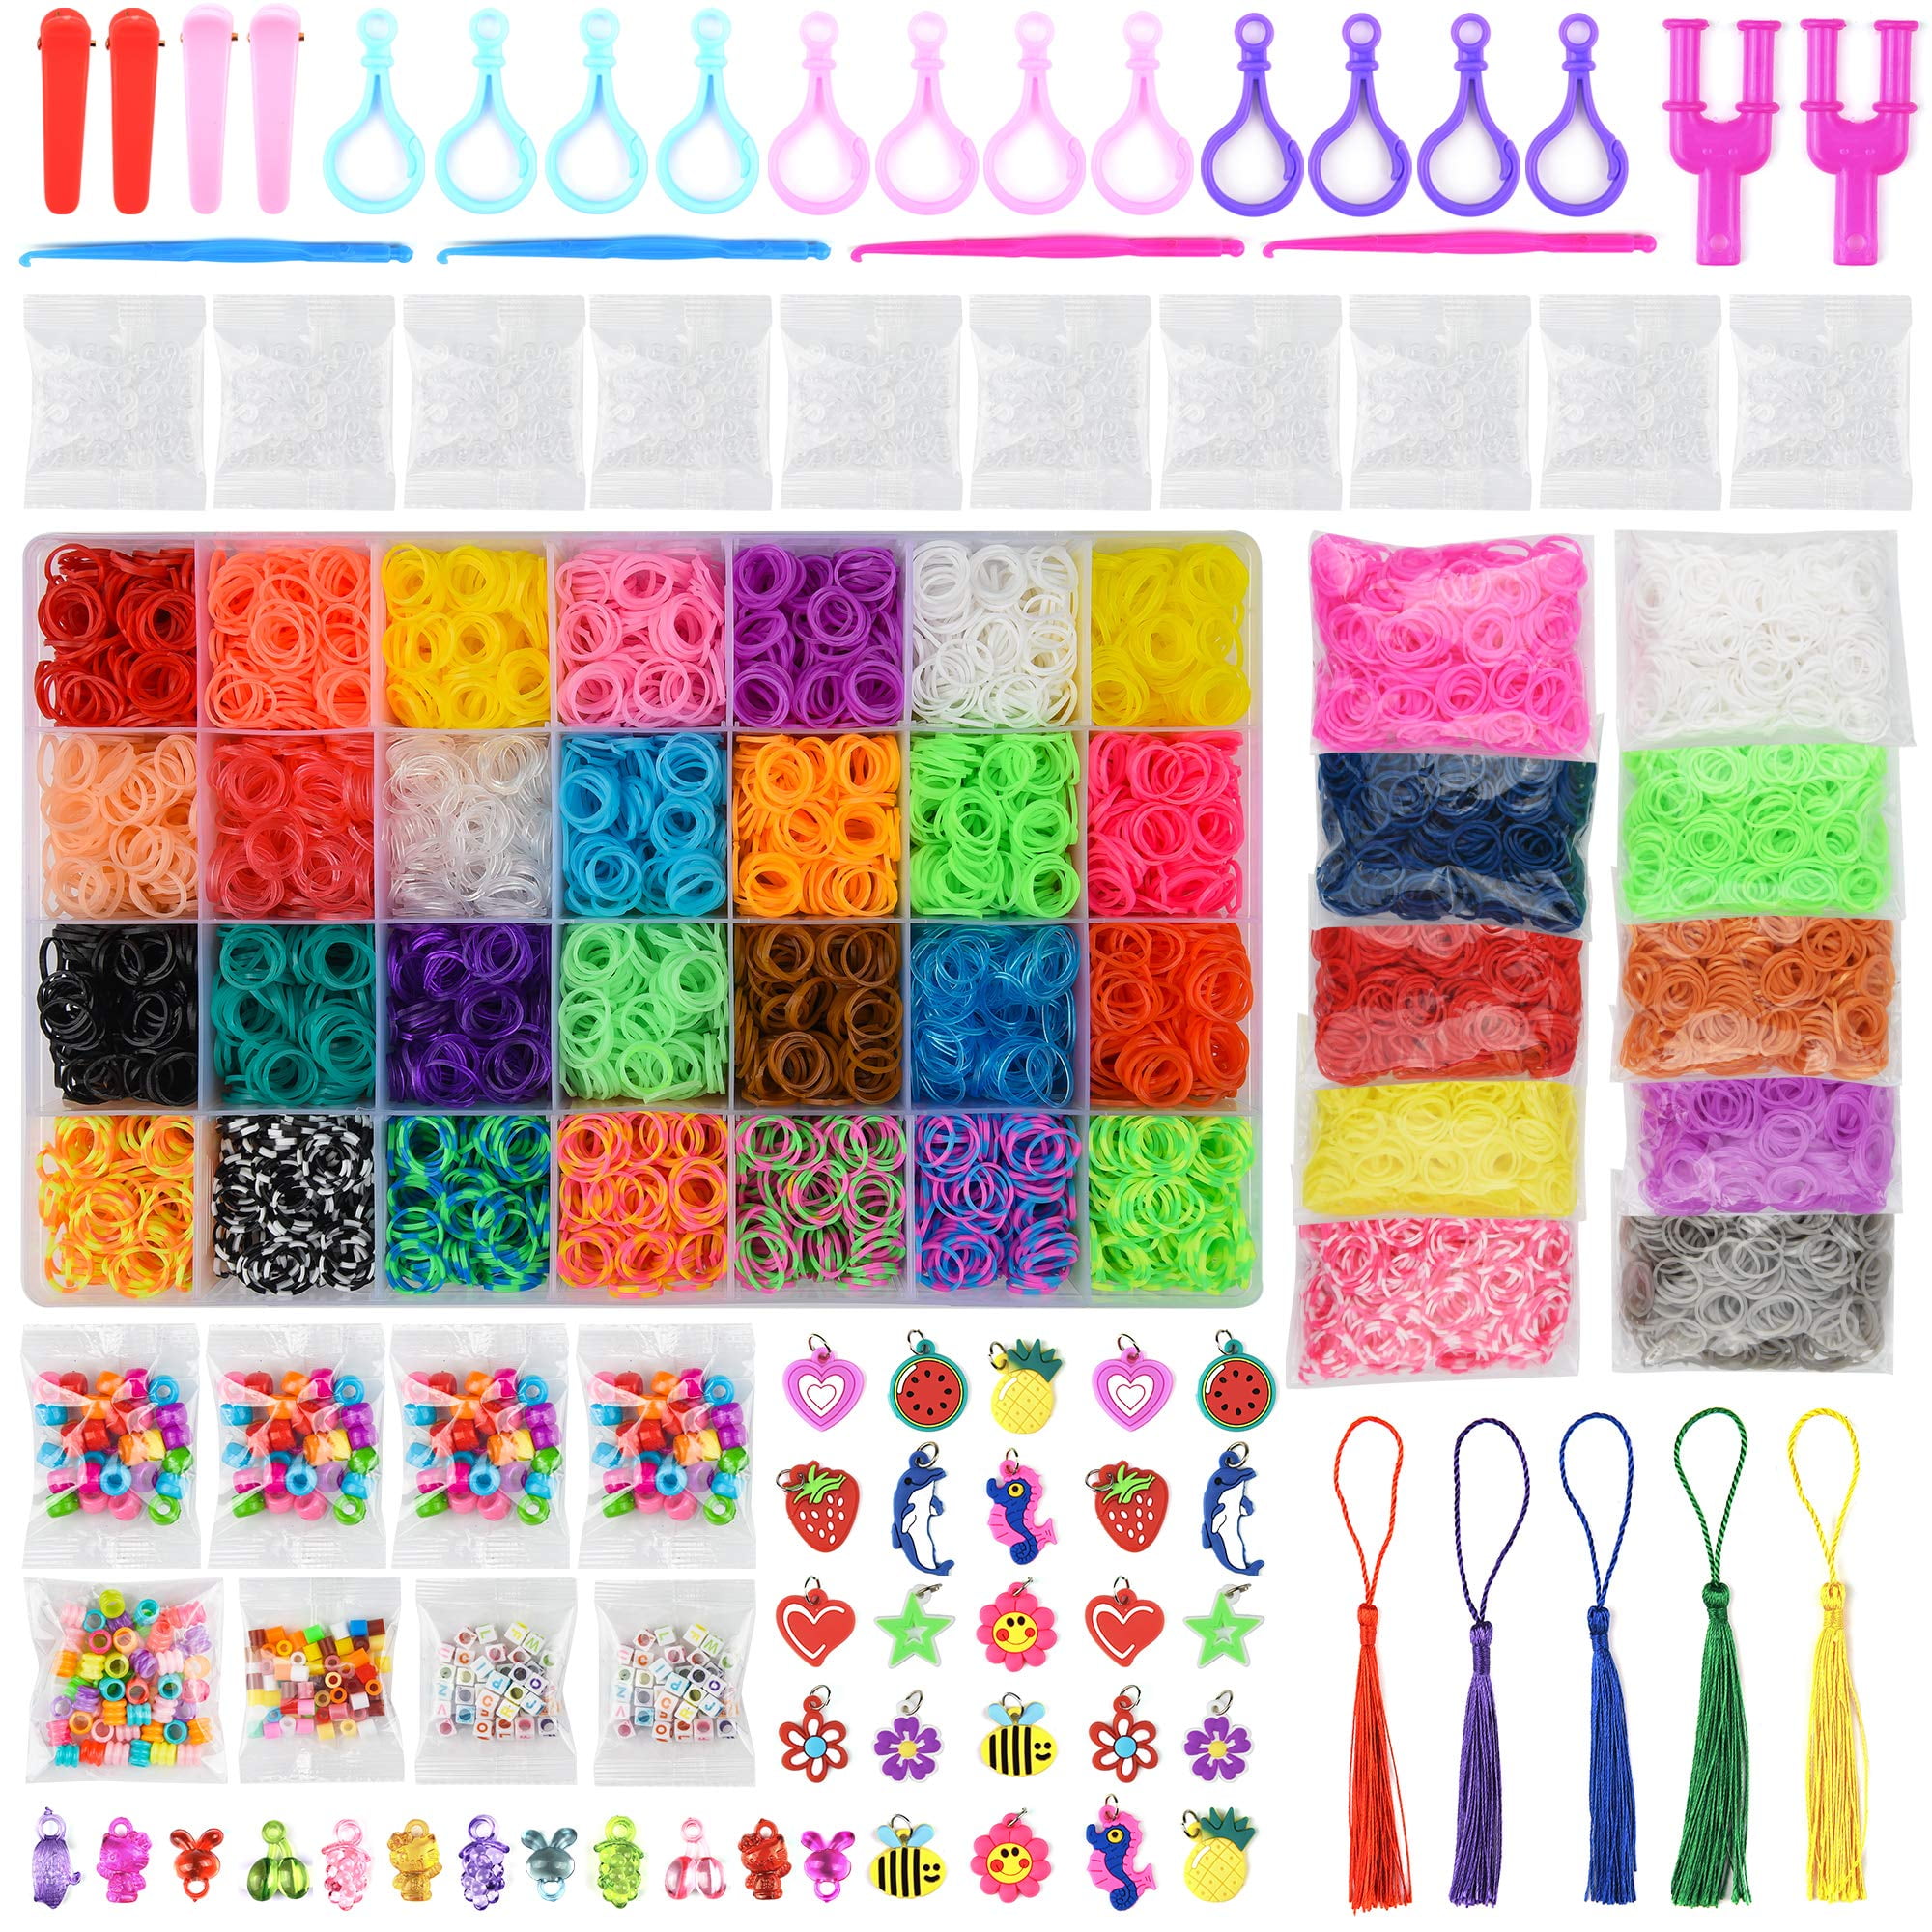 UUEMB 3000+ Rubber Band Bracelet Kit, Colorful Loom Bracelet Making Kit  with Storage Box, DIY Art Craft Kit with Charms Beads for Beginners Kids  Girls